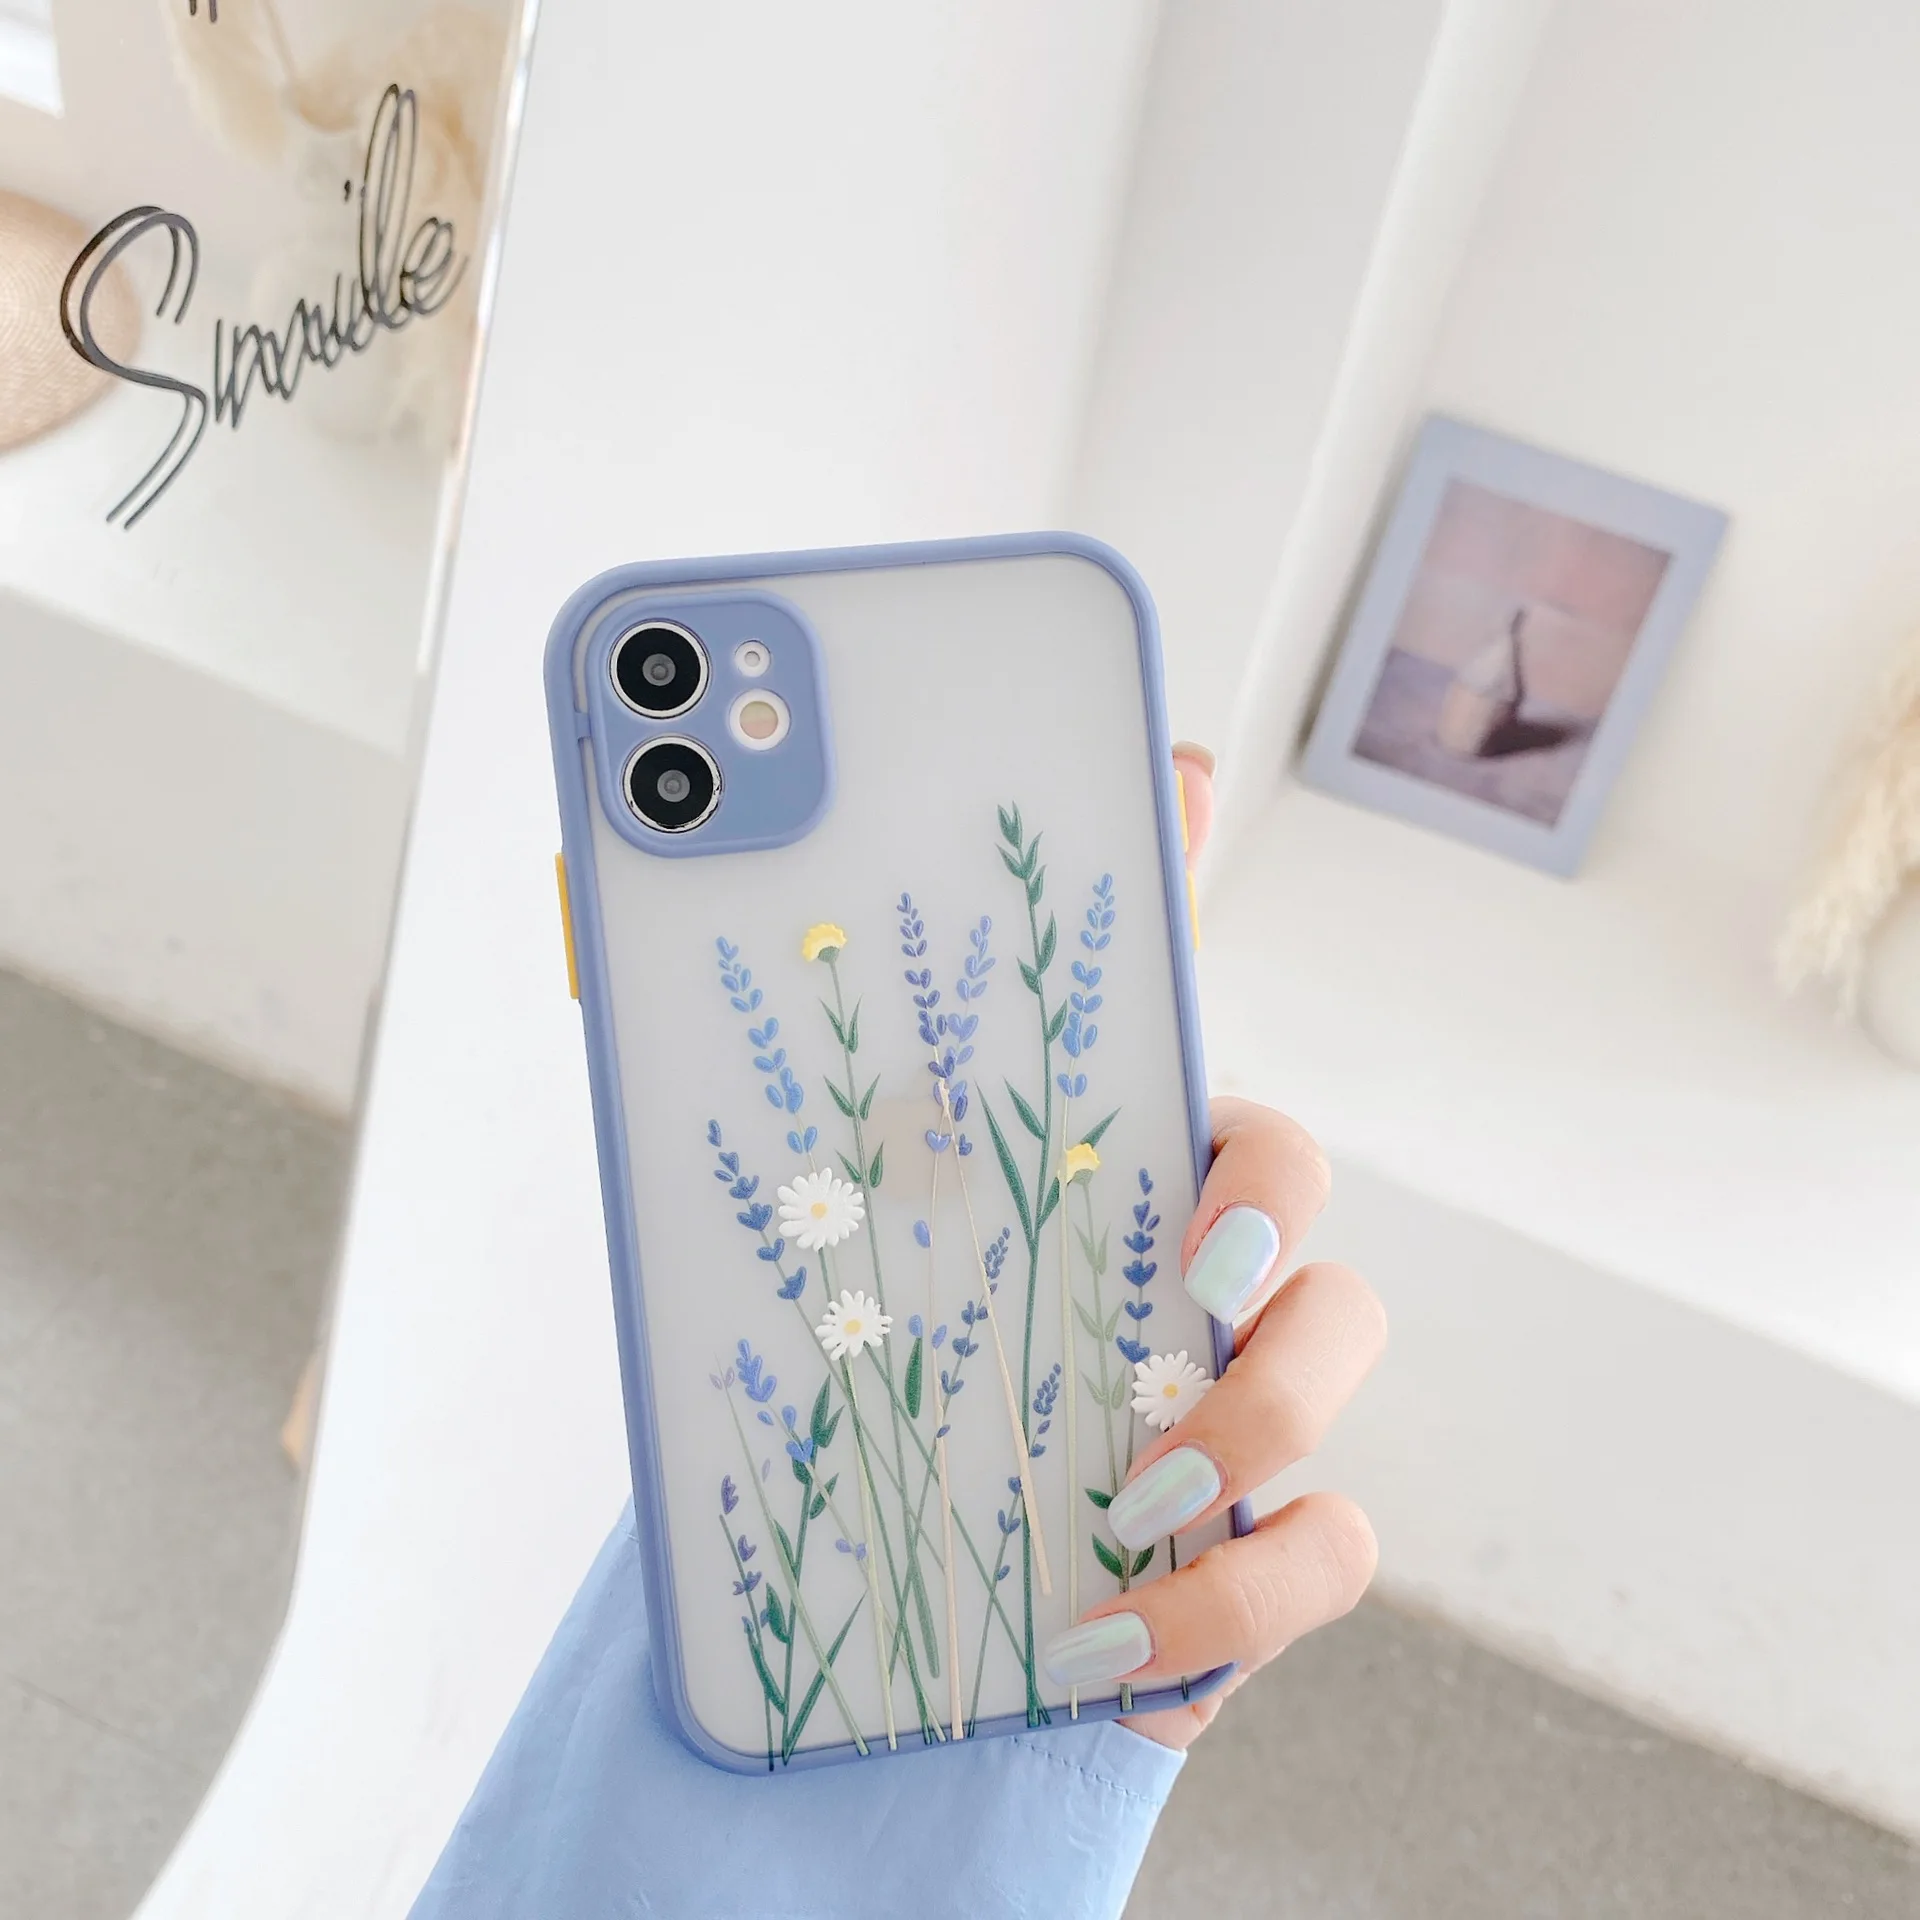 Luxury Flower Case For iPhone 12 Mini 11 Pro Max X XR XS Max 7 8 Plus 3D  Relief Floral Transparent Soft TPU Back Cover